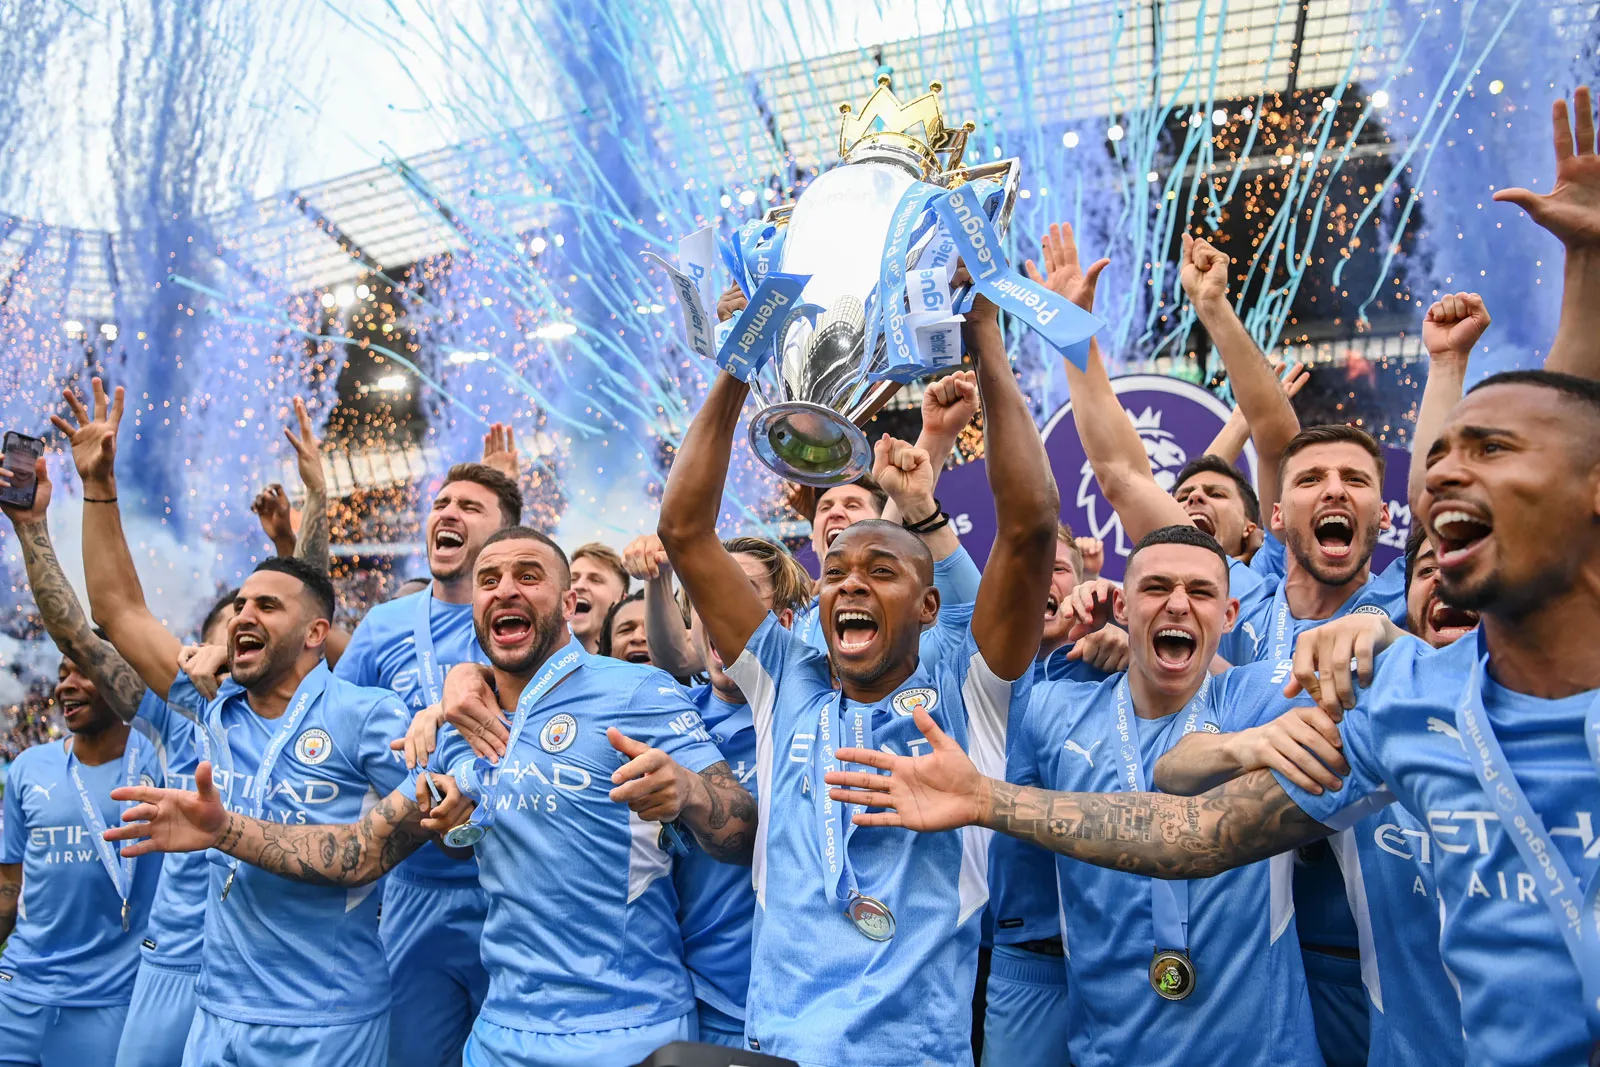 Manchester-City-Football-Club-team-celebrates-with-Premier-League-trophy-championship